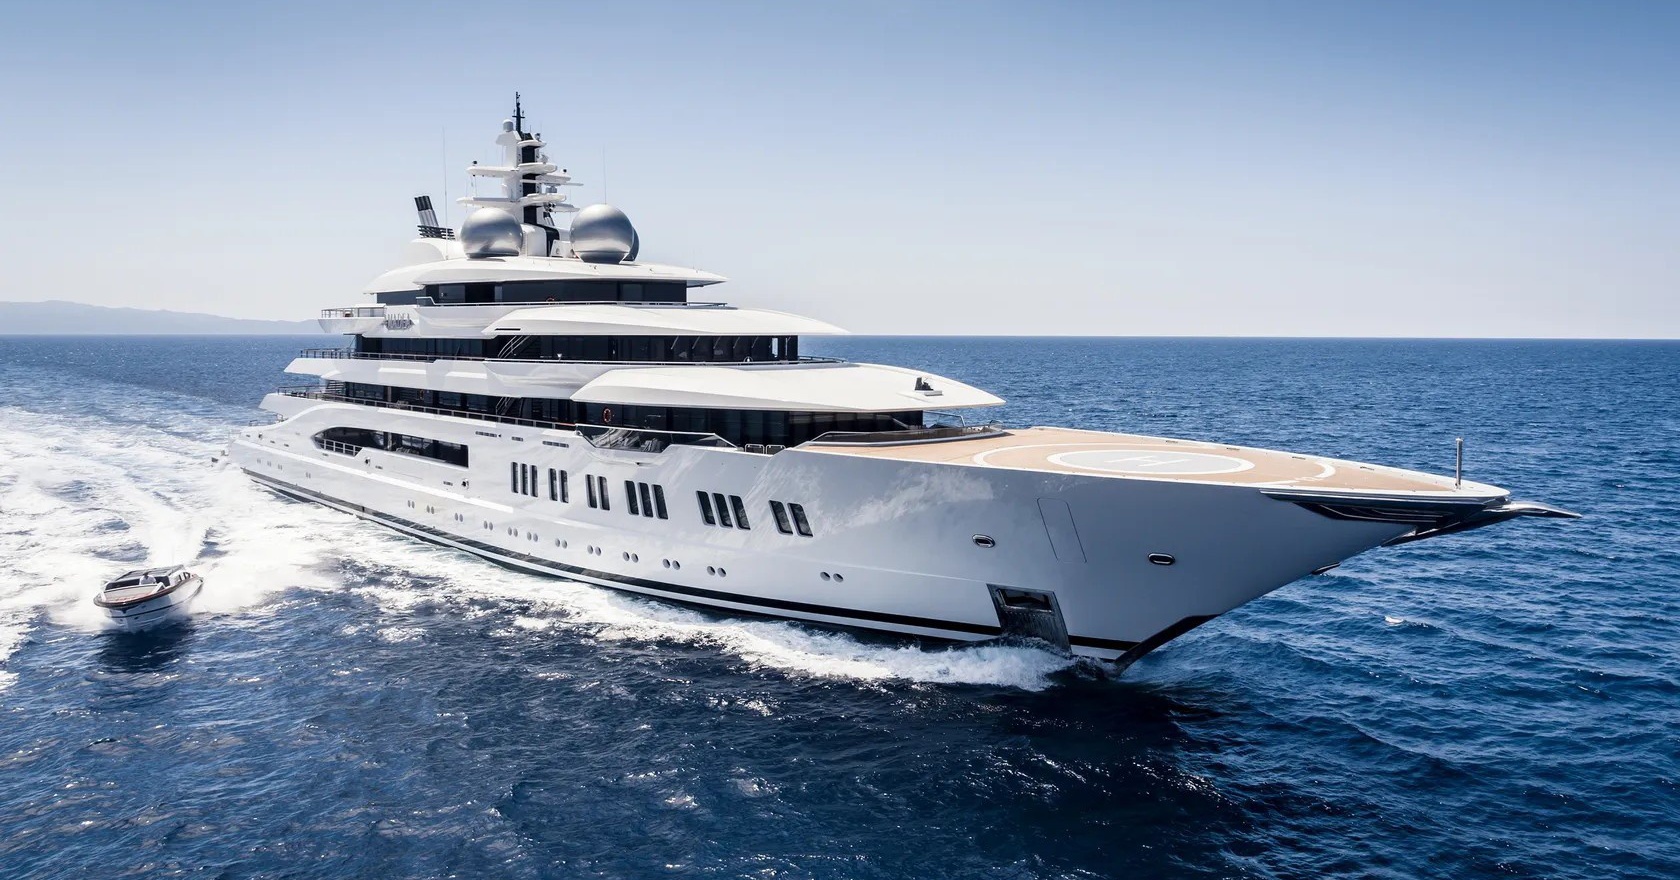 The mystery of the owner of the Russian superyacht has just been confiscated by the US